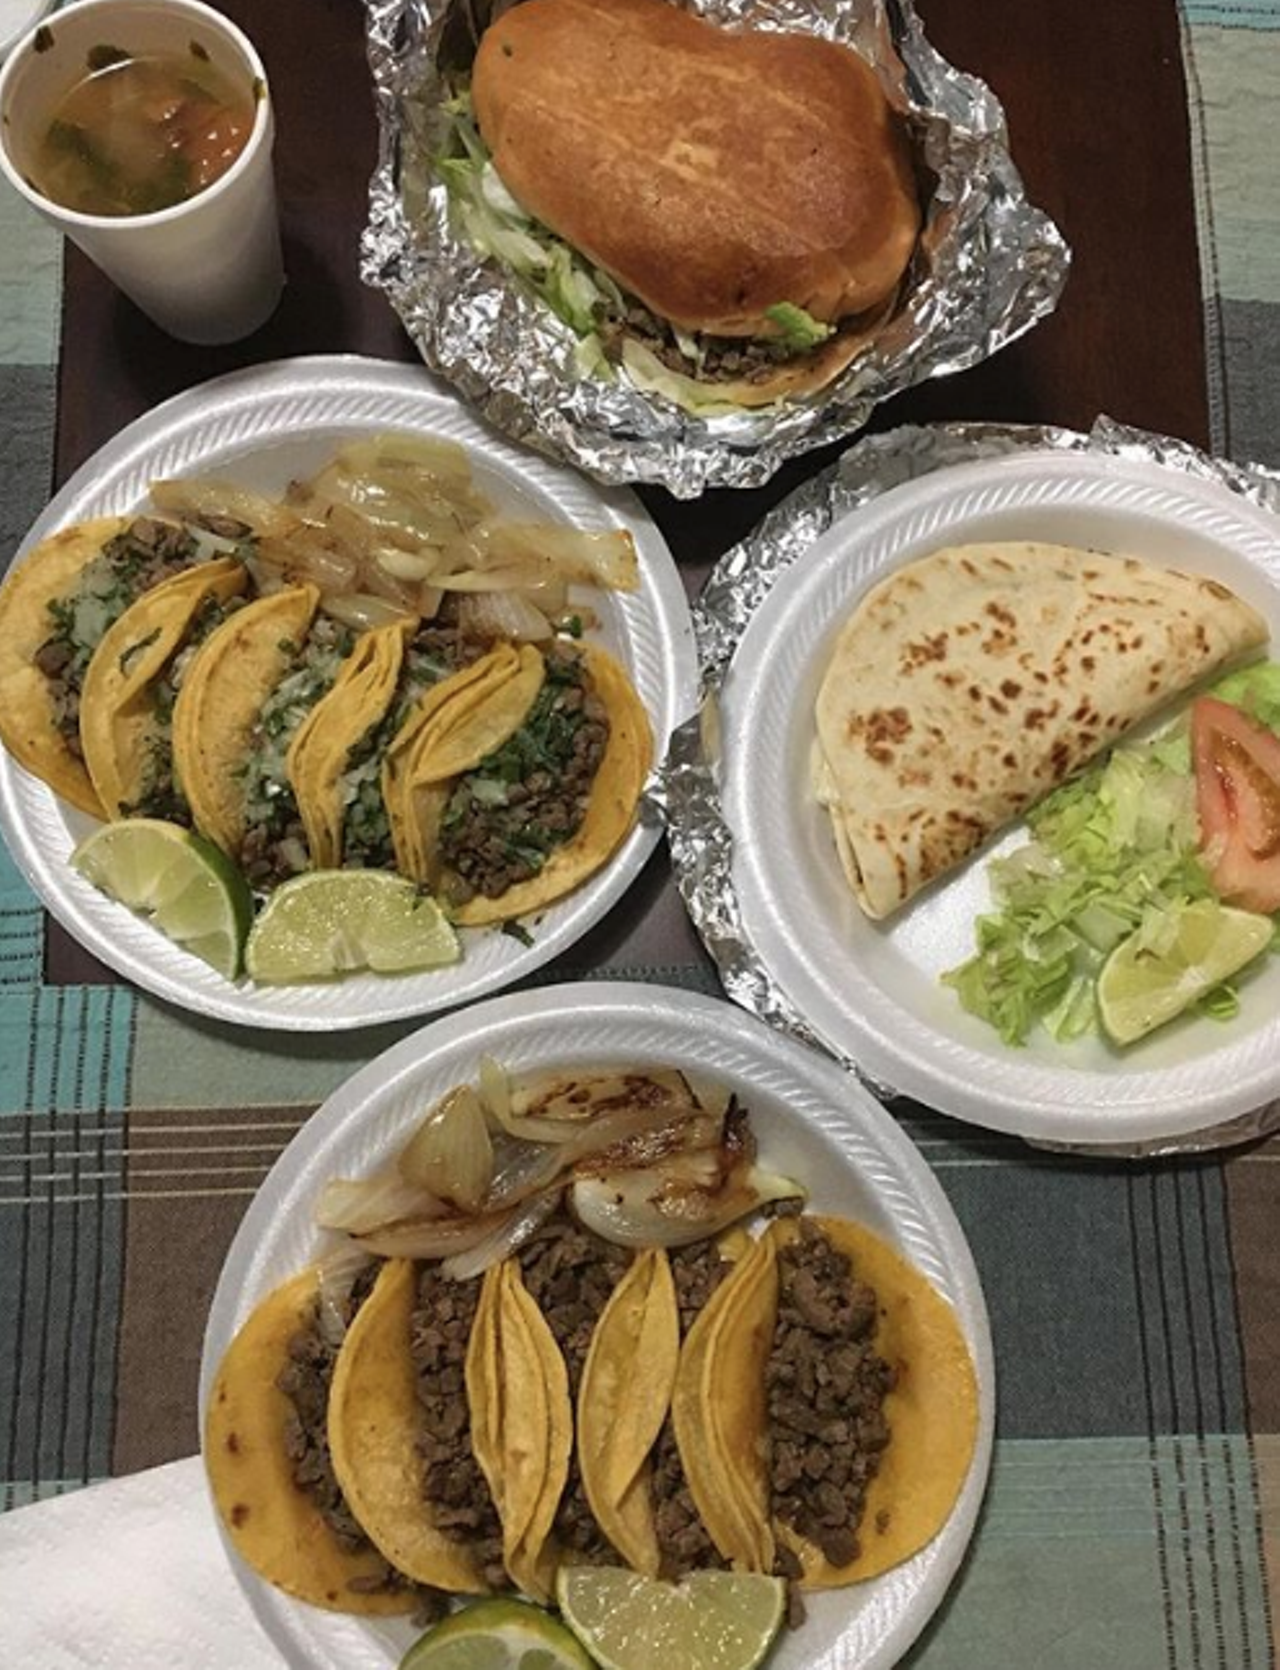 Tacos El Pelon
2355 Goliad Road, (210) 459-3796, tacos-el-pelon-mexican-restaurant.business.site
Plenty of local spots serve up their take on street tacos, but we’re sure you won’t mind trying some fresh tacos you’ve never tried before. Choose from al pastor, tripas, barbacoa, buche or asada — or opt for a quesadilla, torta or burrito.
Photo via Instagram / j.with.an.e